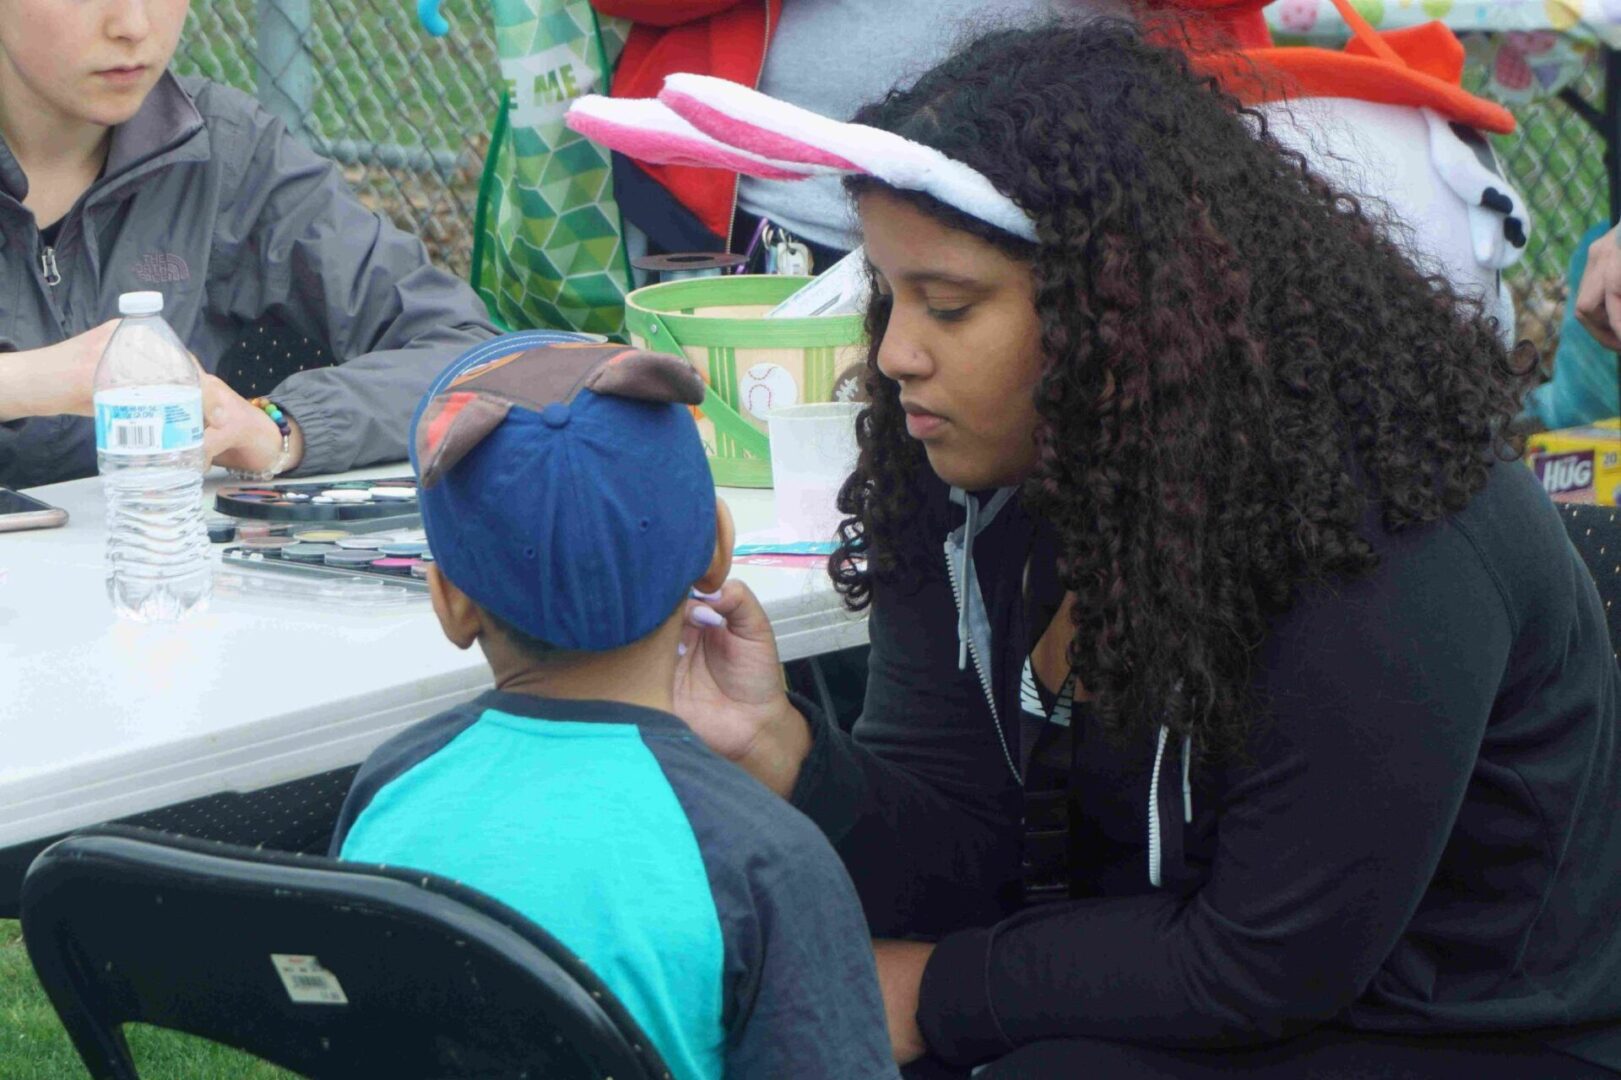 A woman in bunny ears face painting a boy with a cap